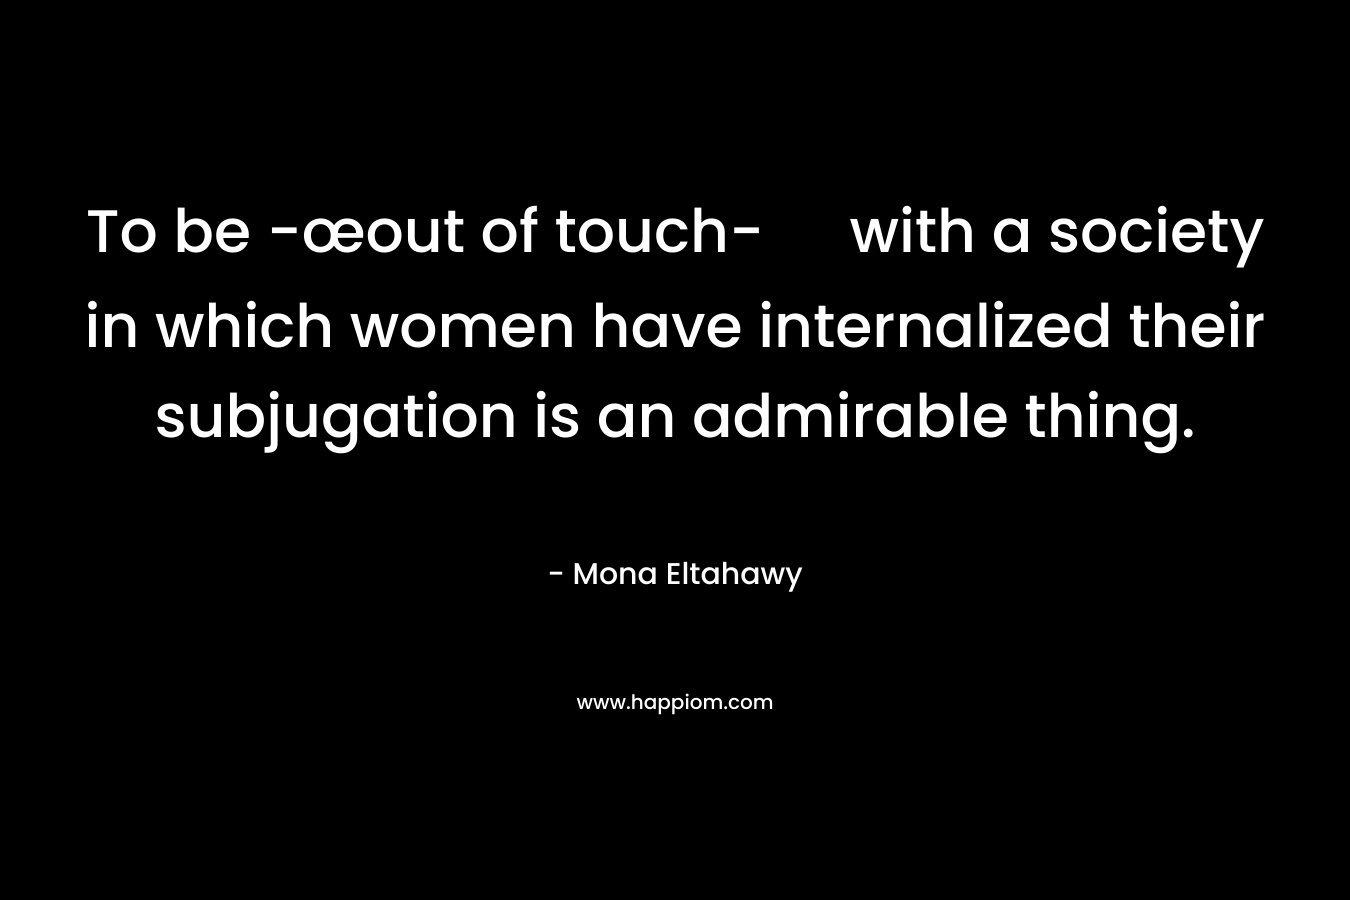 To be -œout of touch- with a society in which women have internalized their subjugation is an admirable thing.